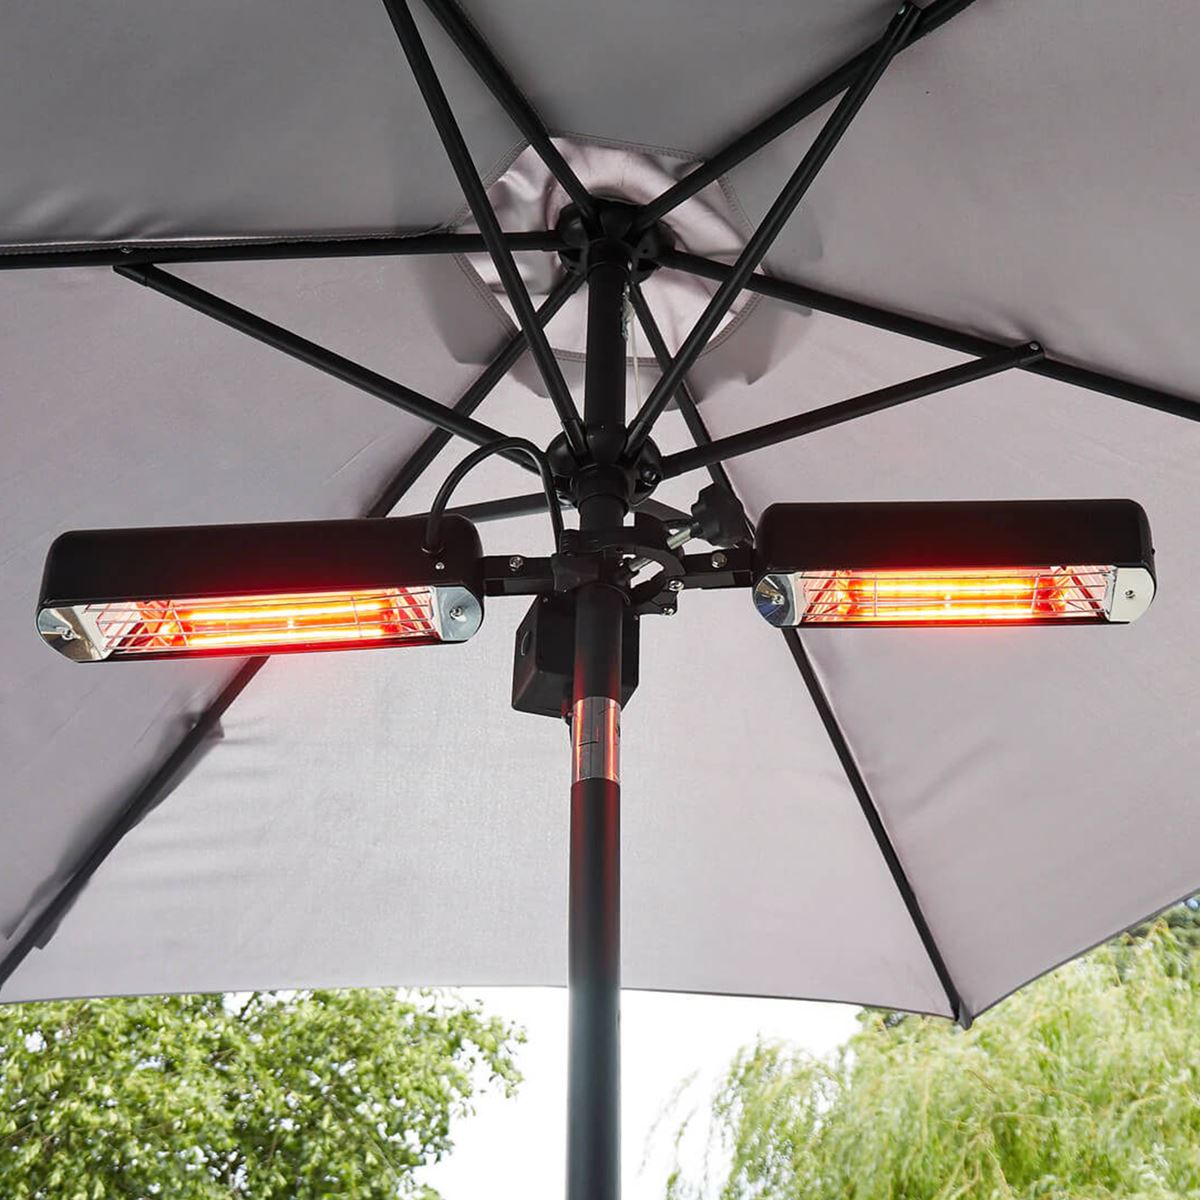 Dellonda Folding Parasol/Gazebo/Patio Outdoor Infrared Heater, Two Panels, Extra Long 5M Cable, 1600W